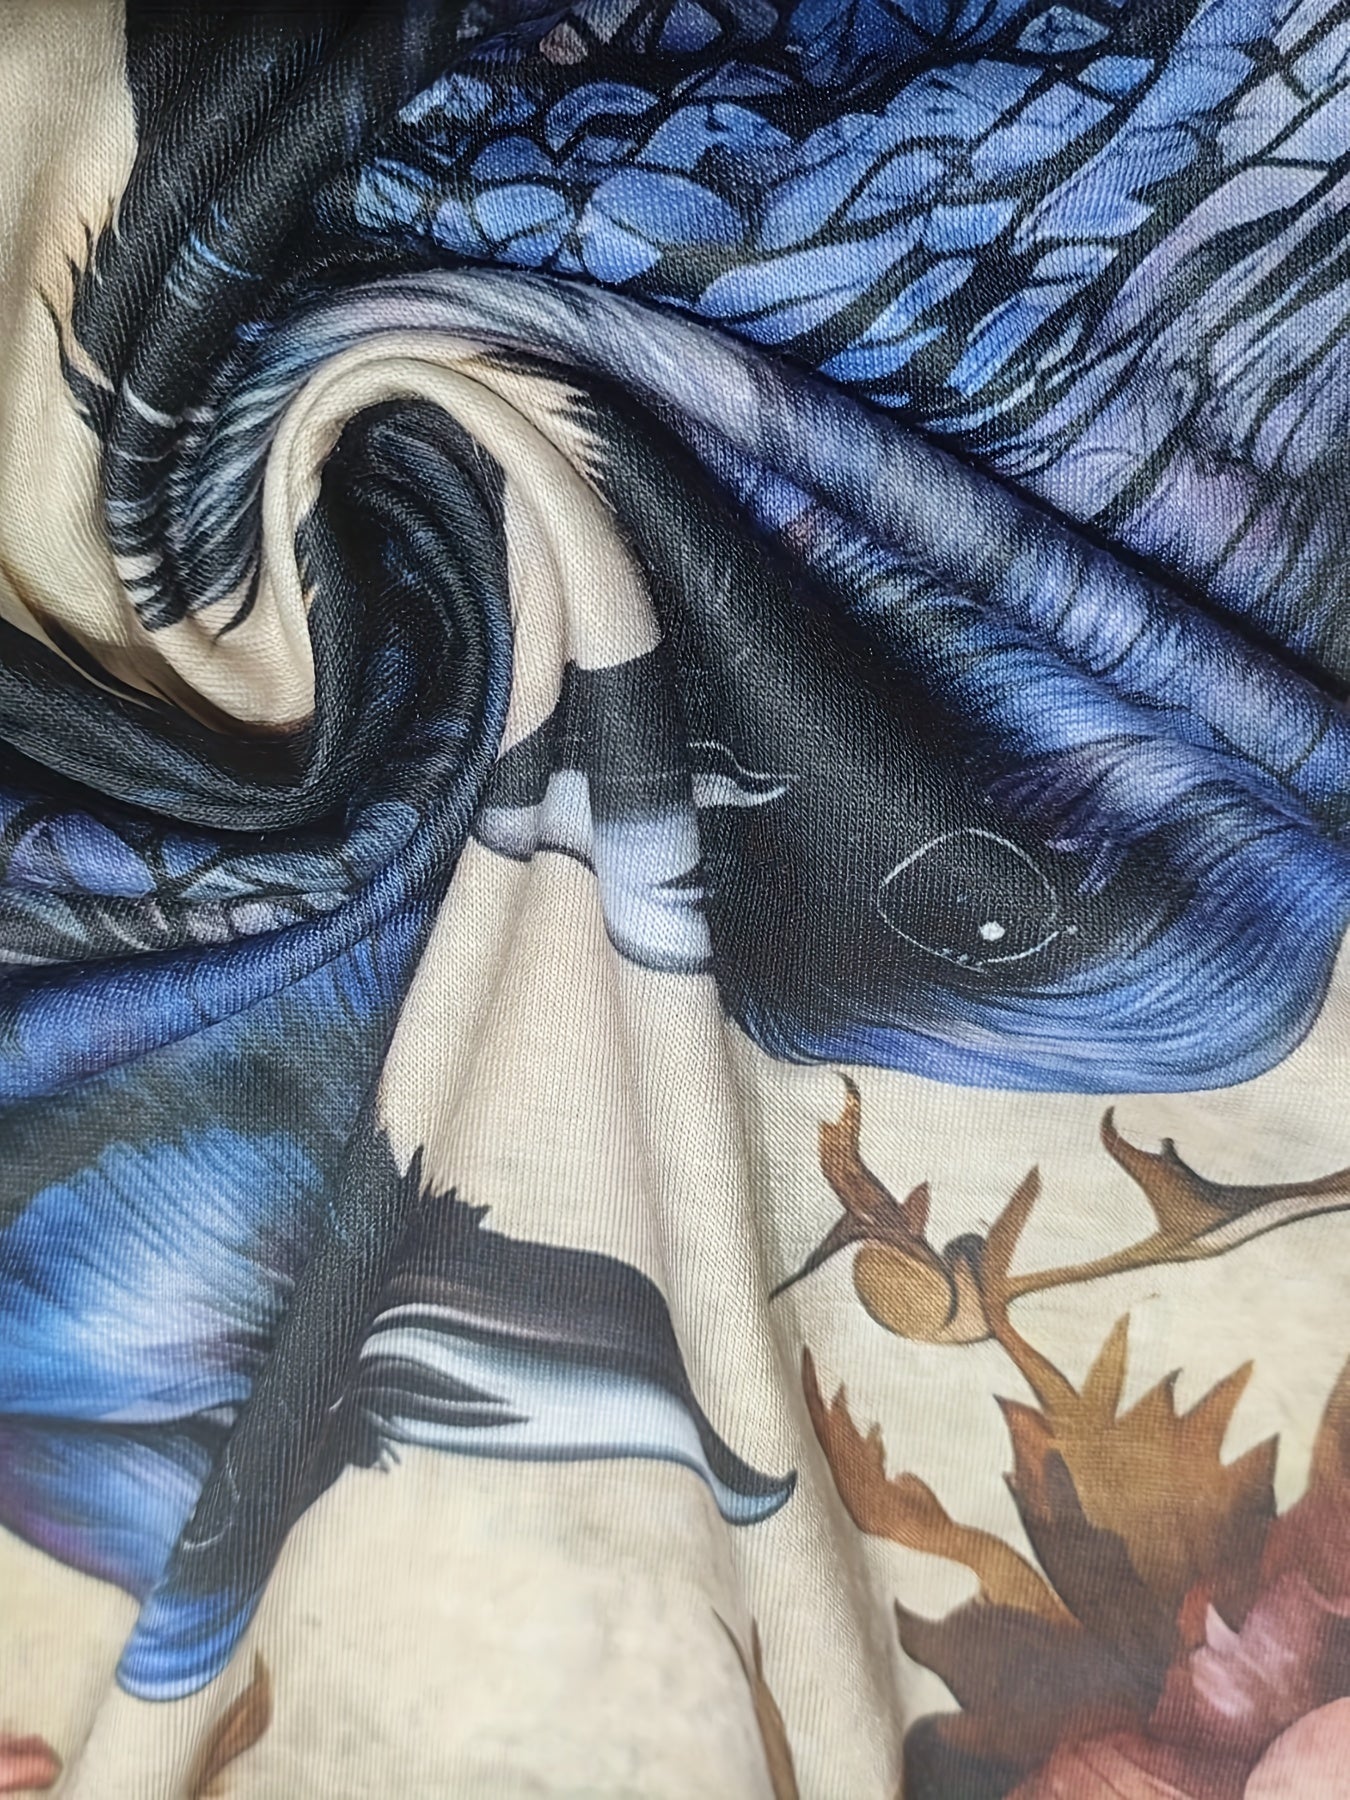 Close-up of a fabric with detailed, colorful print featuring parts of birds and flowers, swirled into a central spiral pattern, showcasing micro elasticity for added comfort. Product shown is the Birds & Floral Print T-shirt, Vintage Crew Neck Long Sleeve T-shirt from Maramalive™, Women's Clothing.